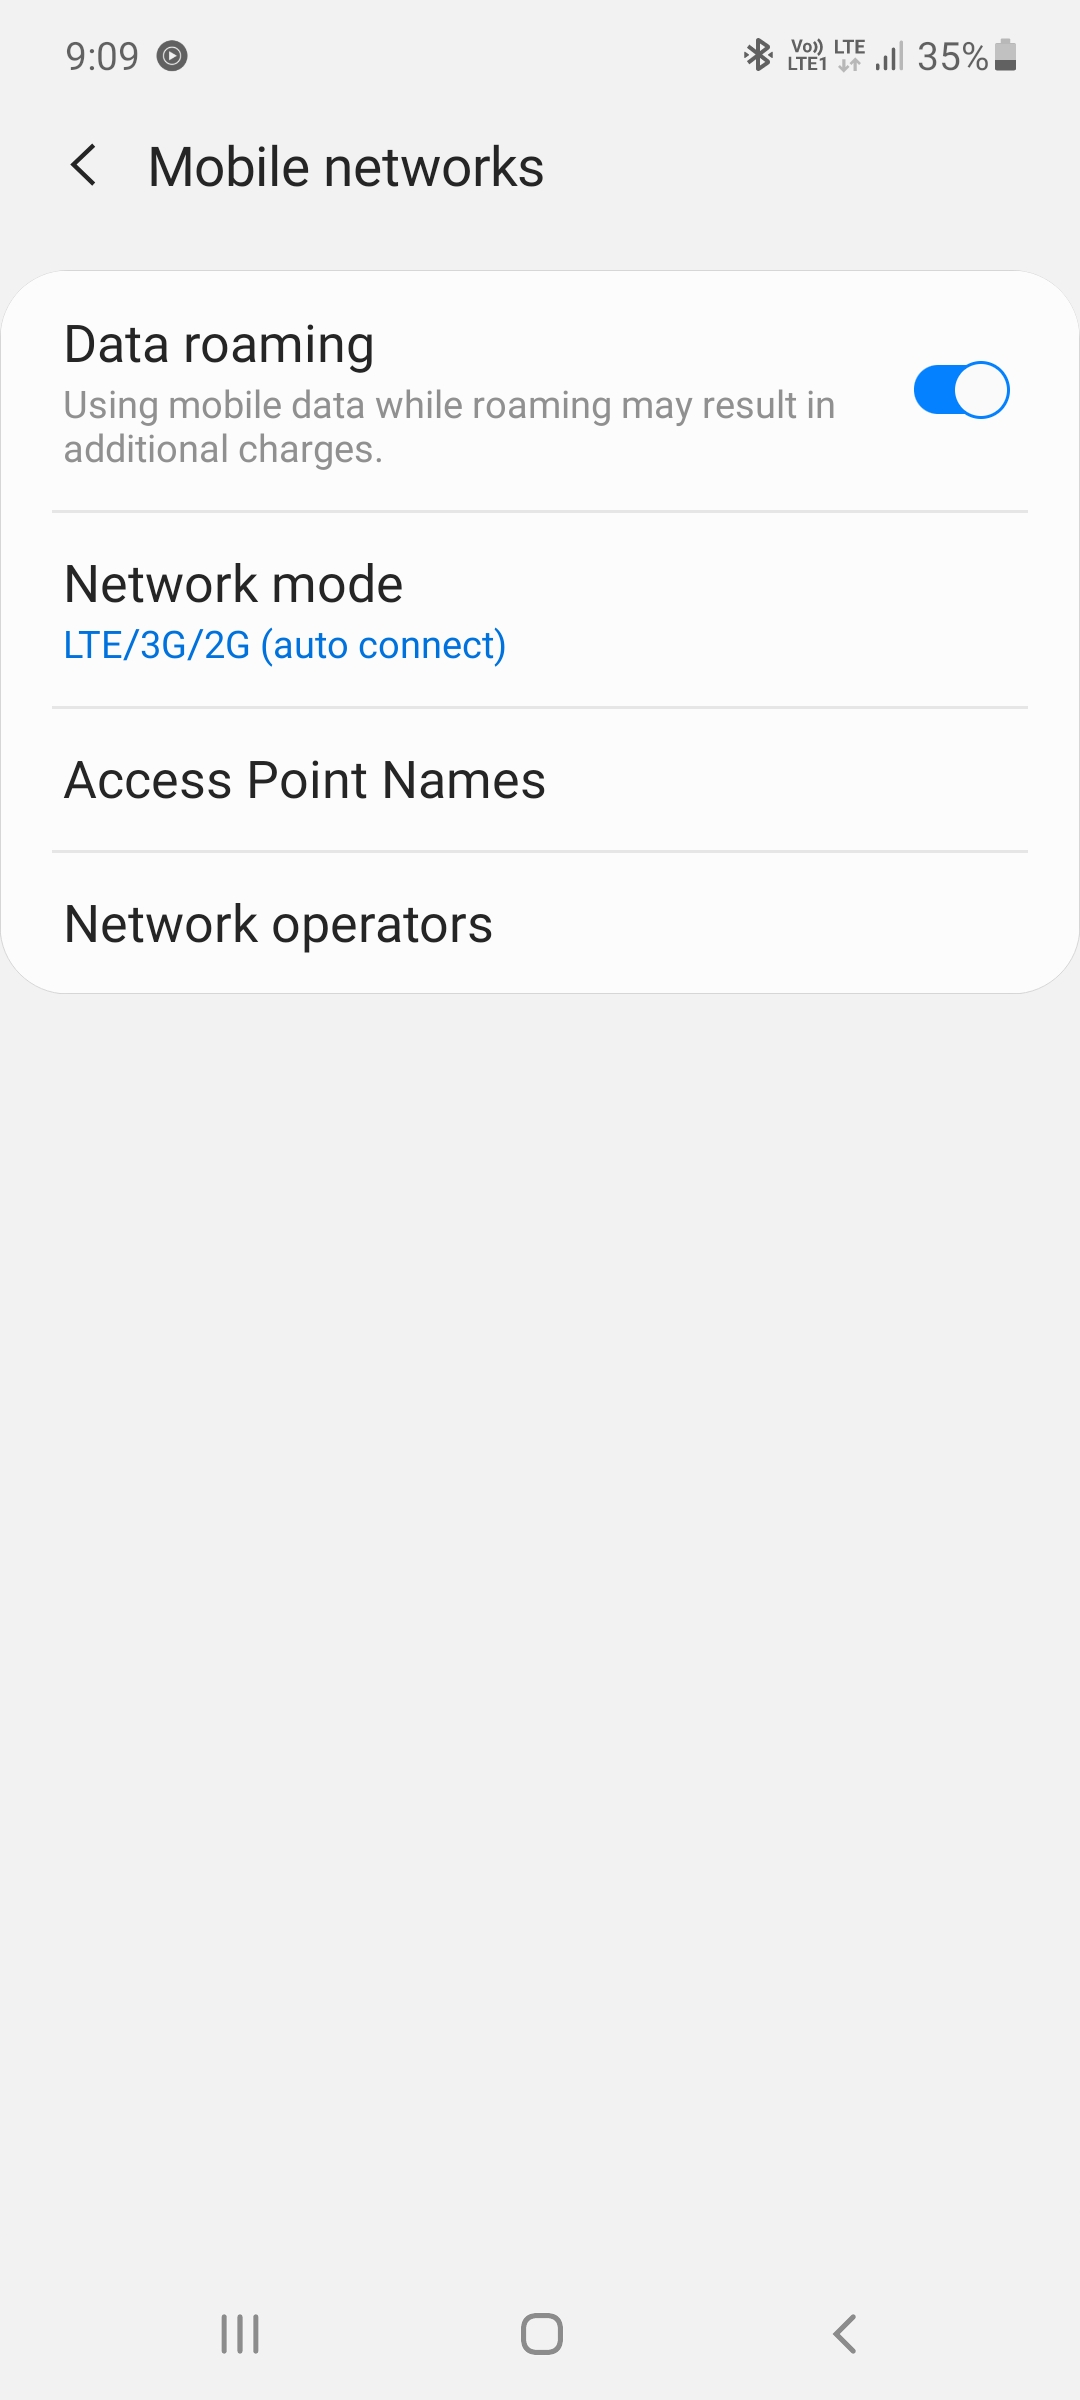 voLTE enable disable option not available - Samsung Members